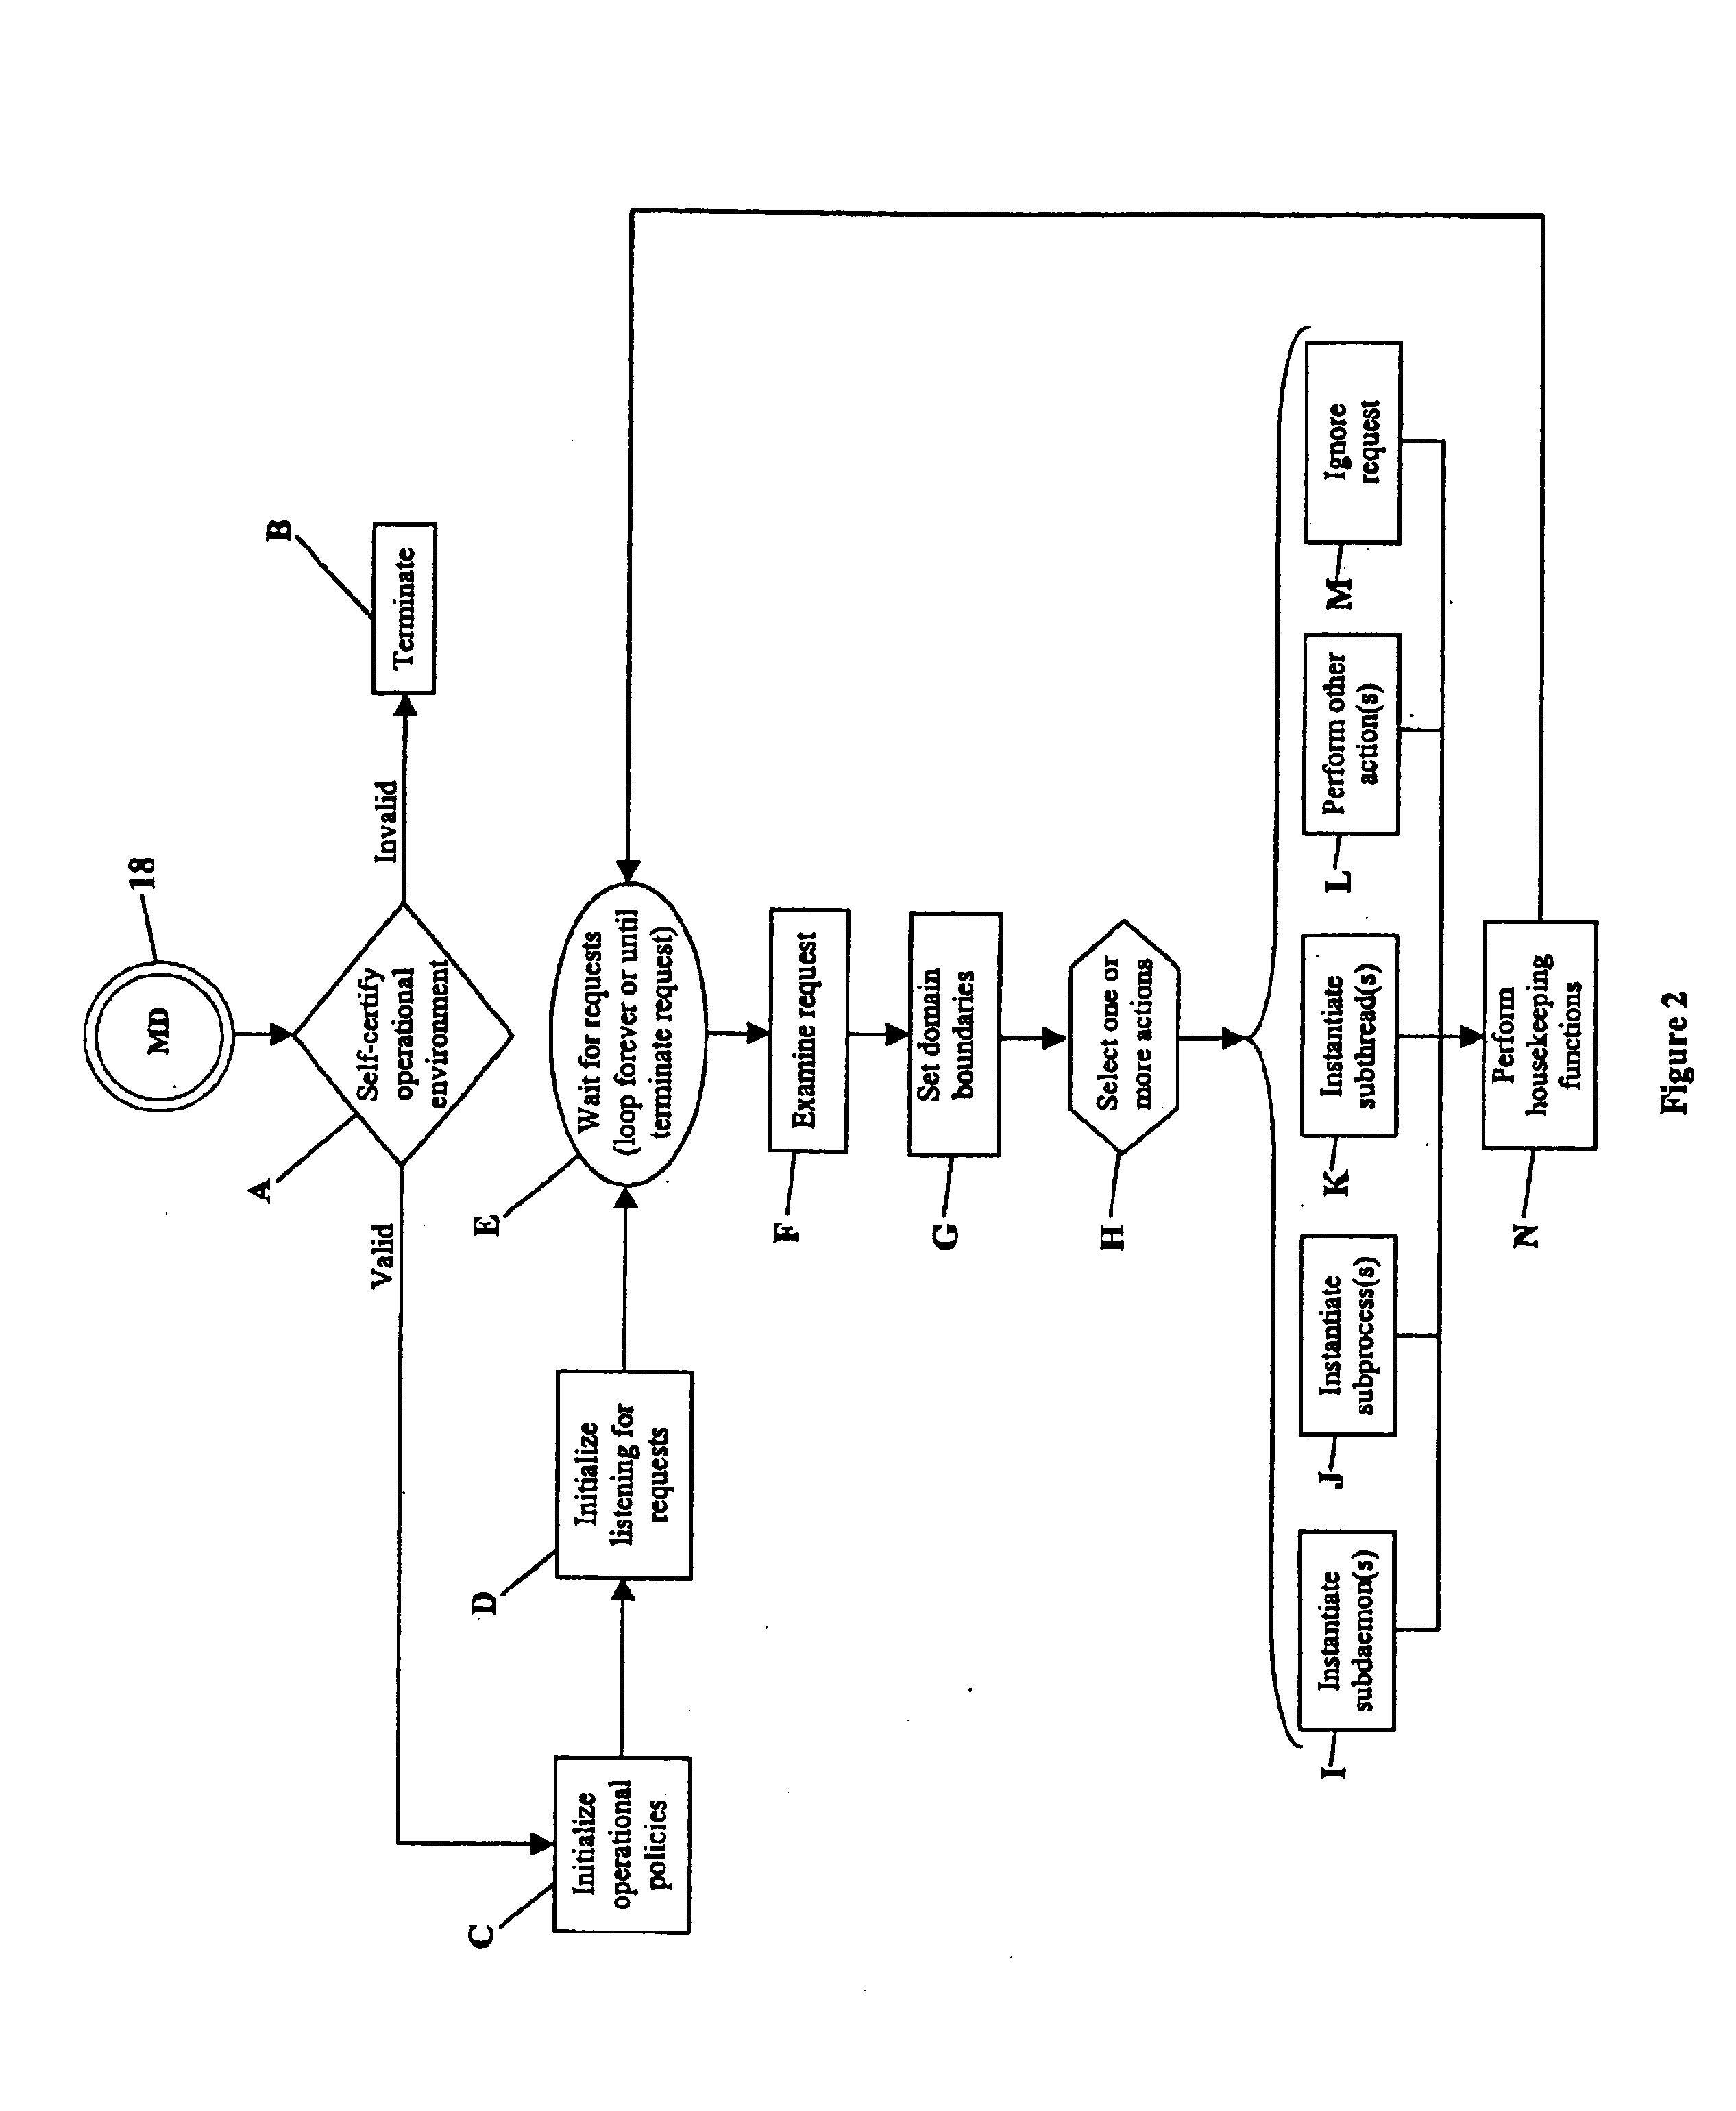 Method for implementing polyinstantiated access control in computer operating systems